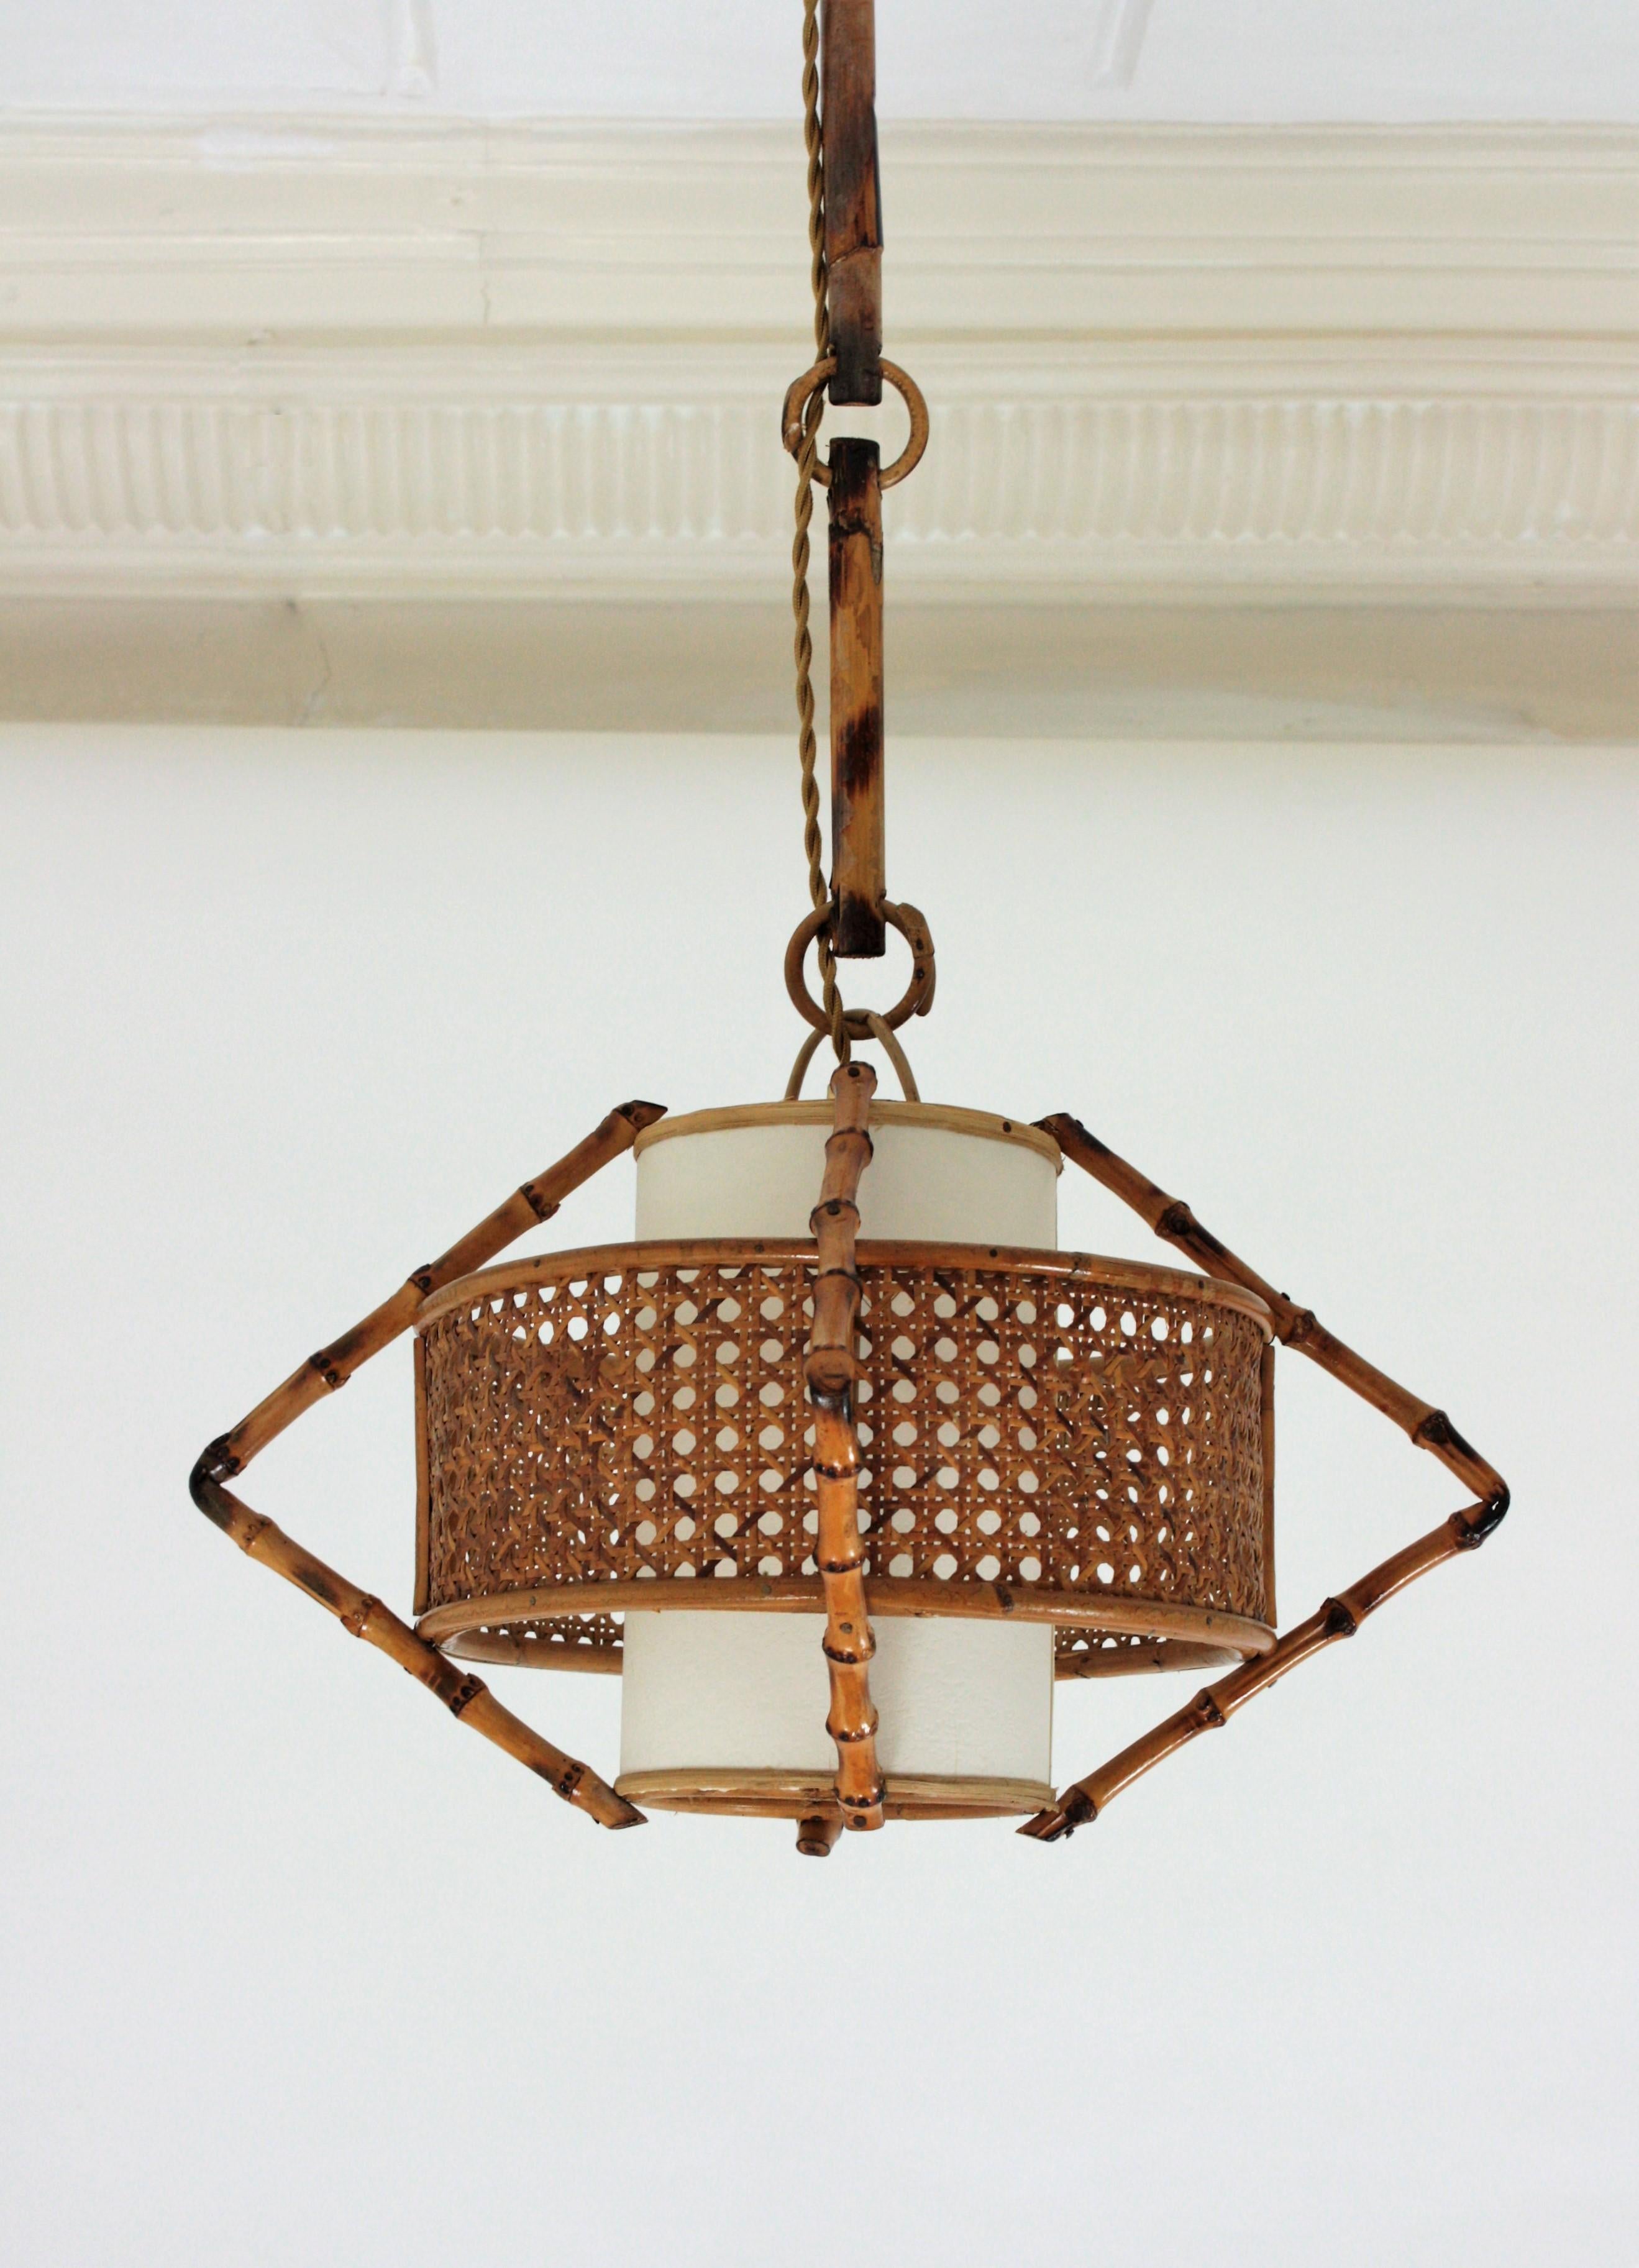 Mid-Century Modern Spanish Modernist Bamboo Rattan and Wicker Pendant Lamp with Tiki Accents, 1950s